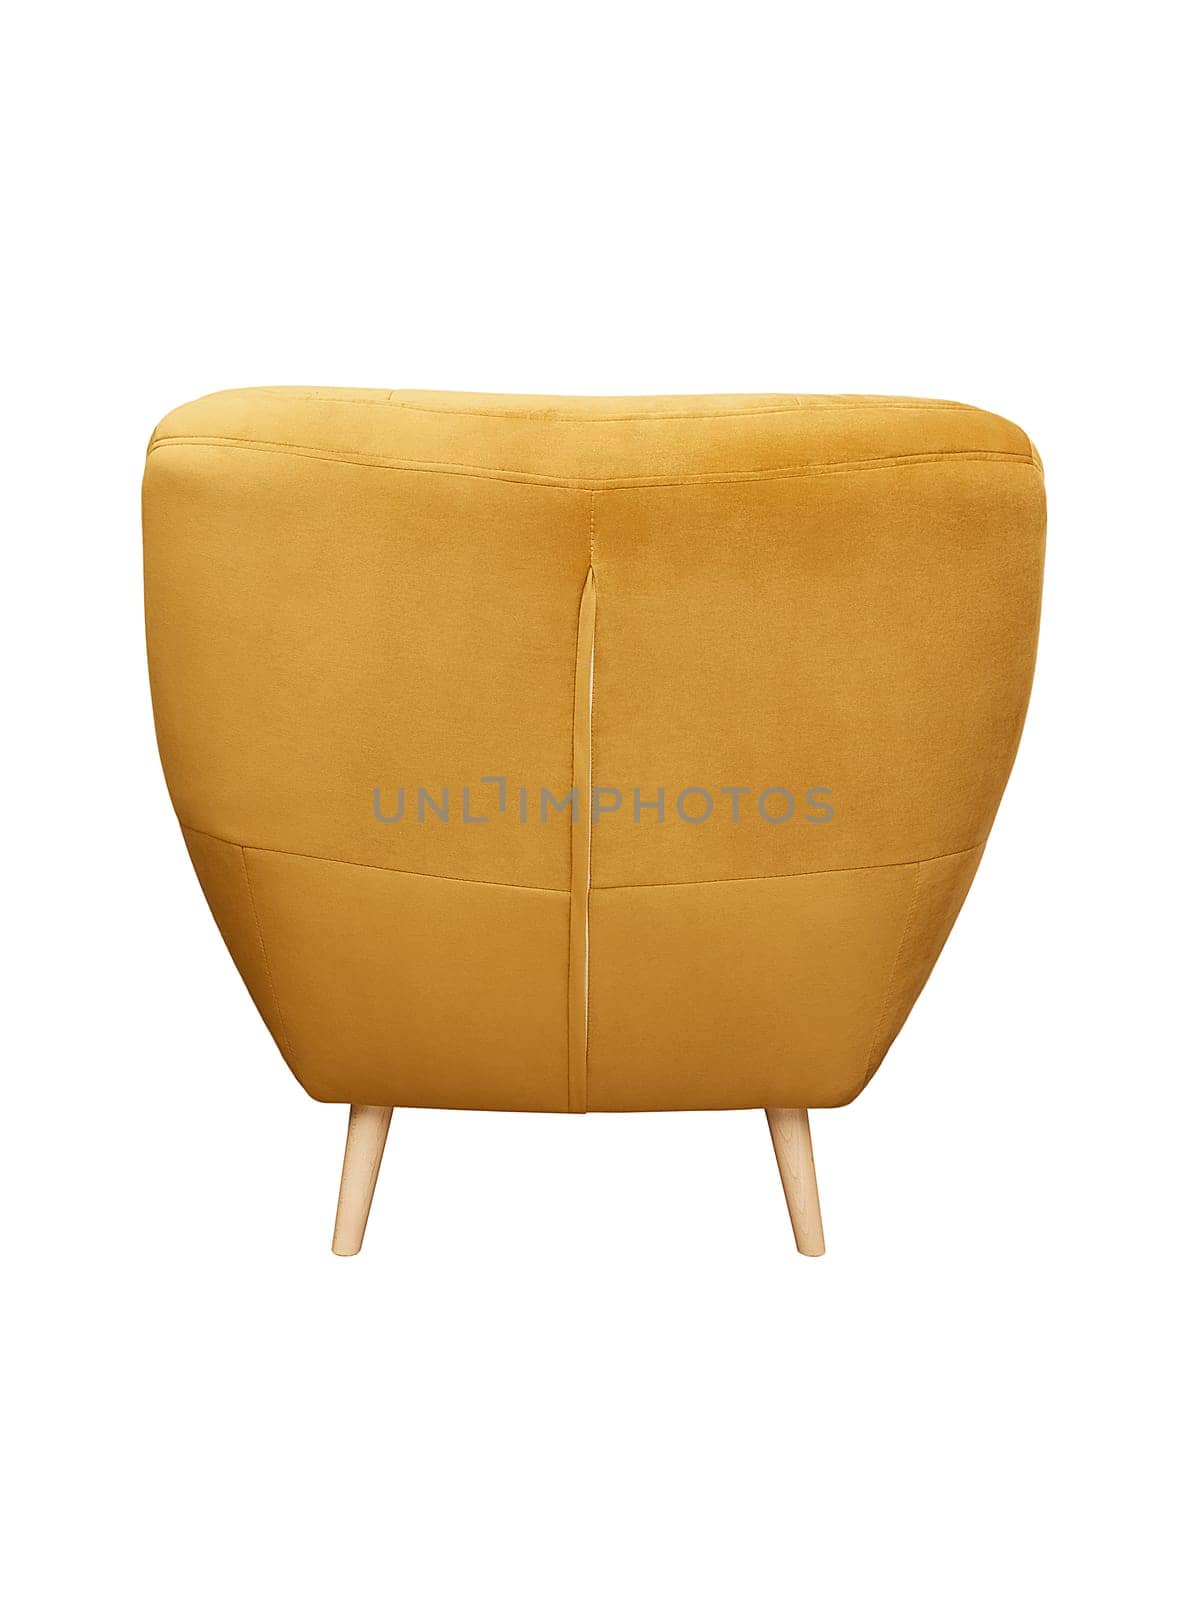 Modern yellow fabric armchair with wooden legs isolated on white background, back view. furniture, interior, home design in minimal style